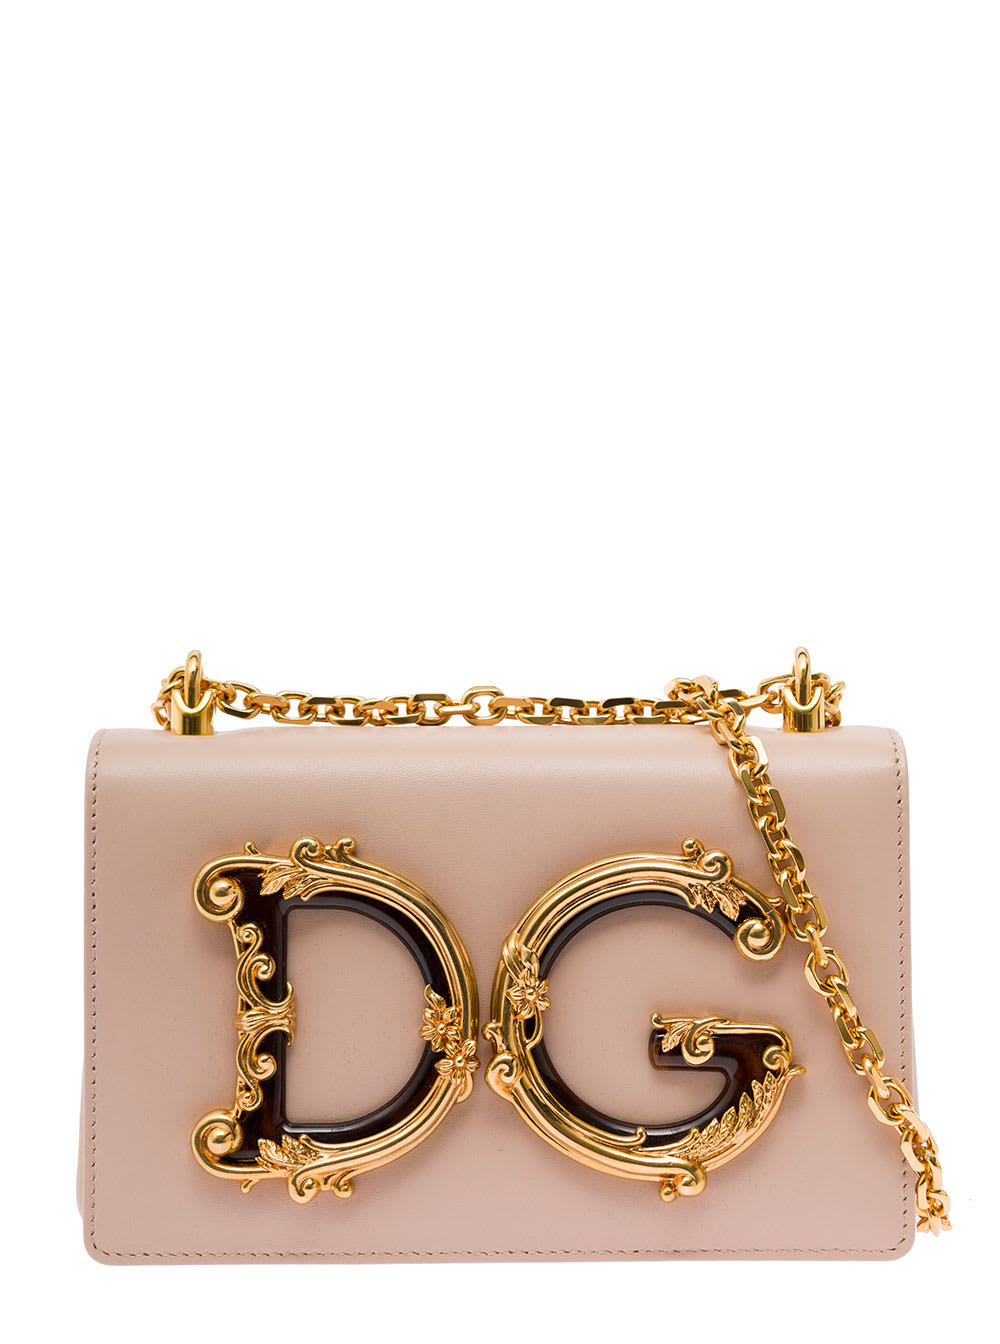 DOLCE & GABBANA PINK BAROCCO CCROSSBODY BAG WITH CHAIN SHOULDER STRAP AND MONOGRAM PLATE ON THE FRONT DOLCE & GABBAN